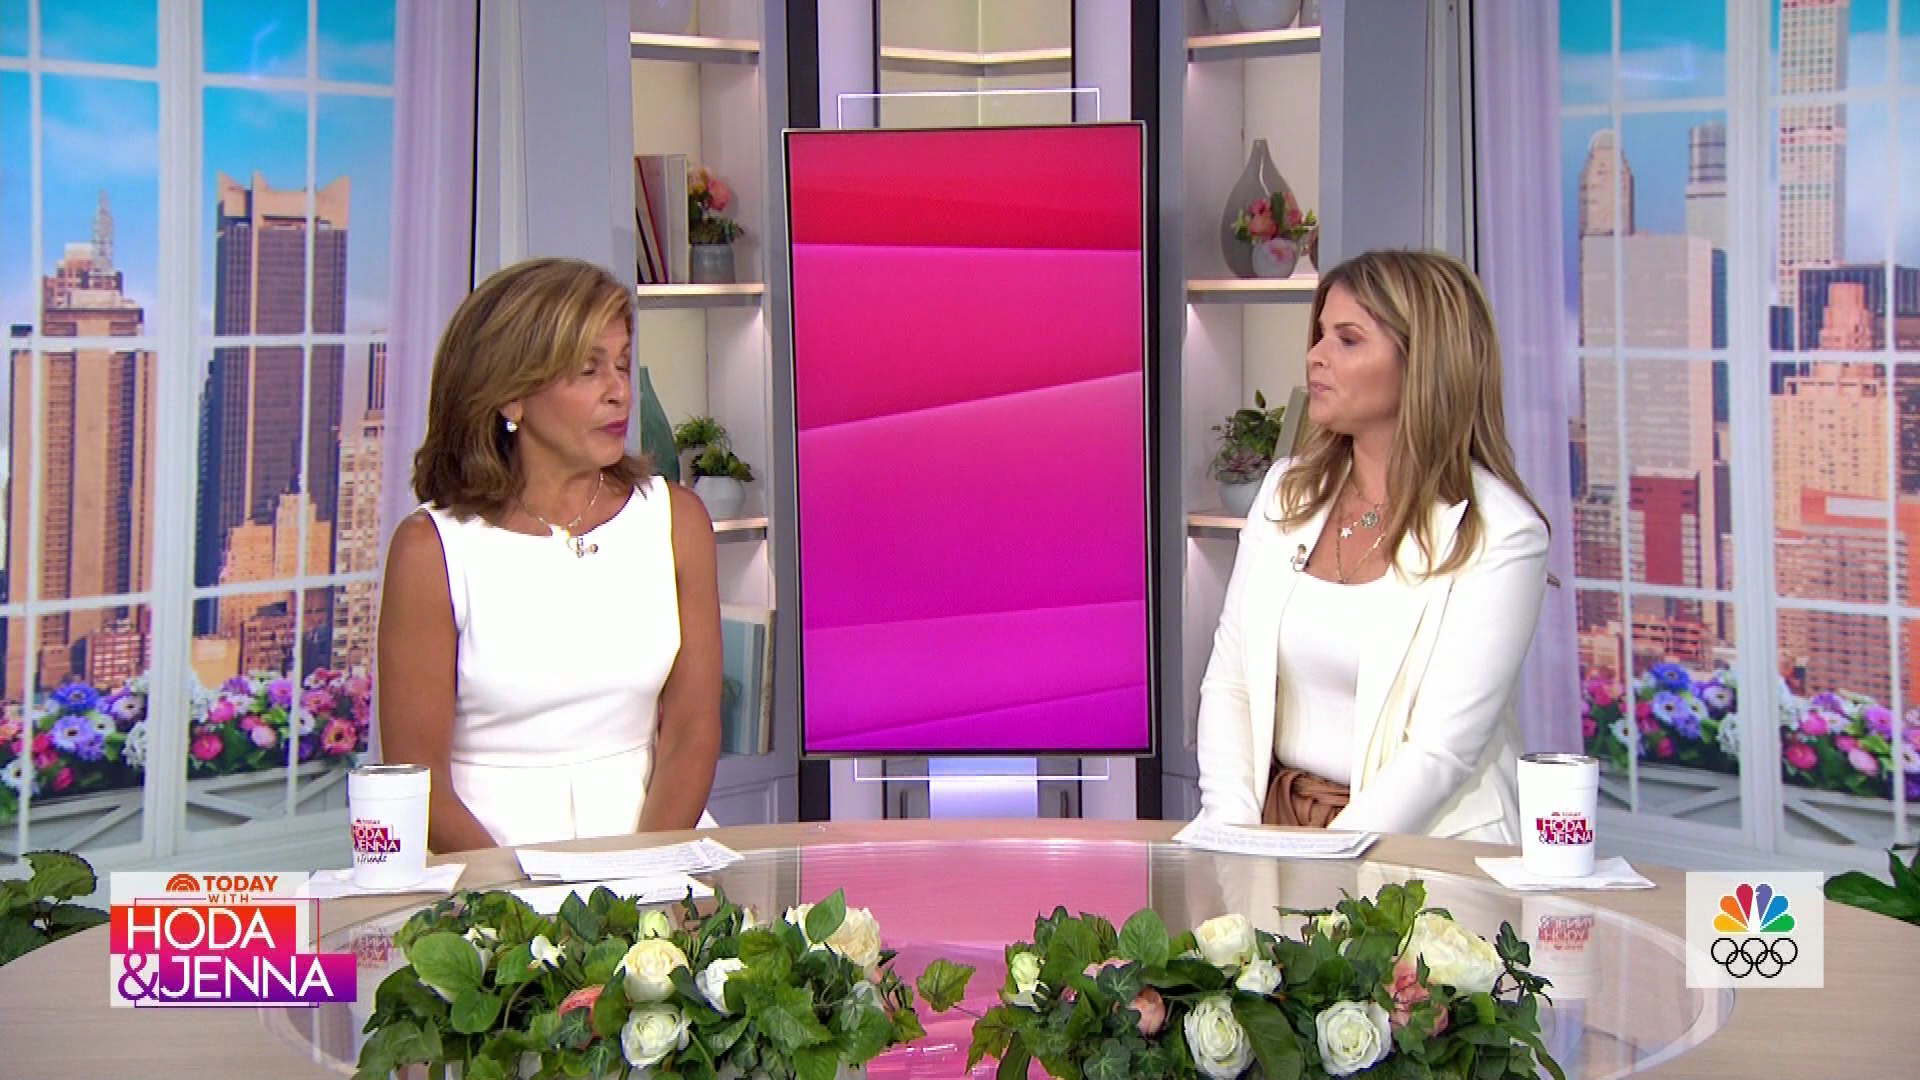 Today With Hoda & Jenna S2021E140 2021-07-16-1000 (02).png